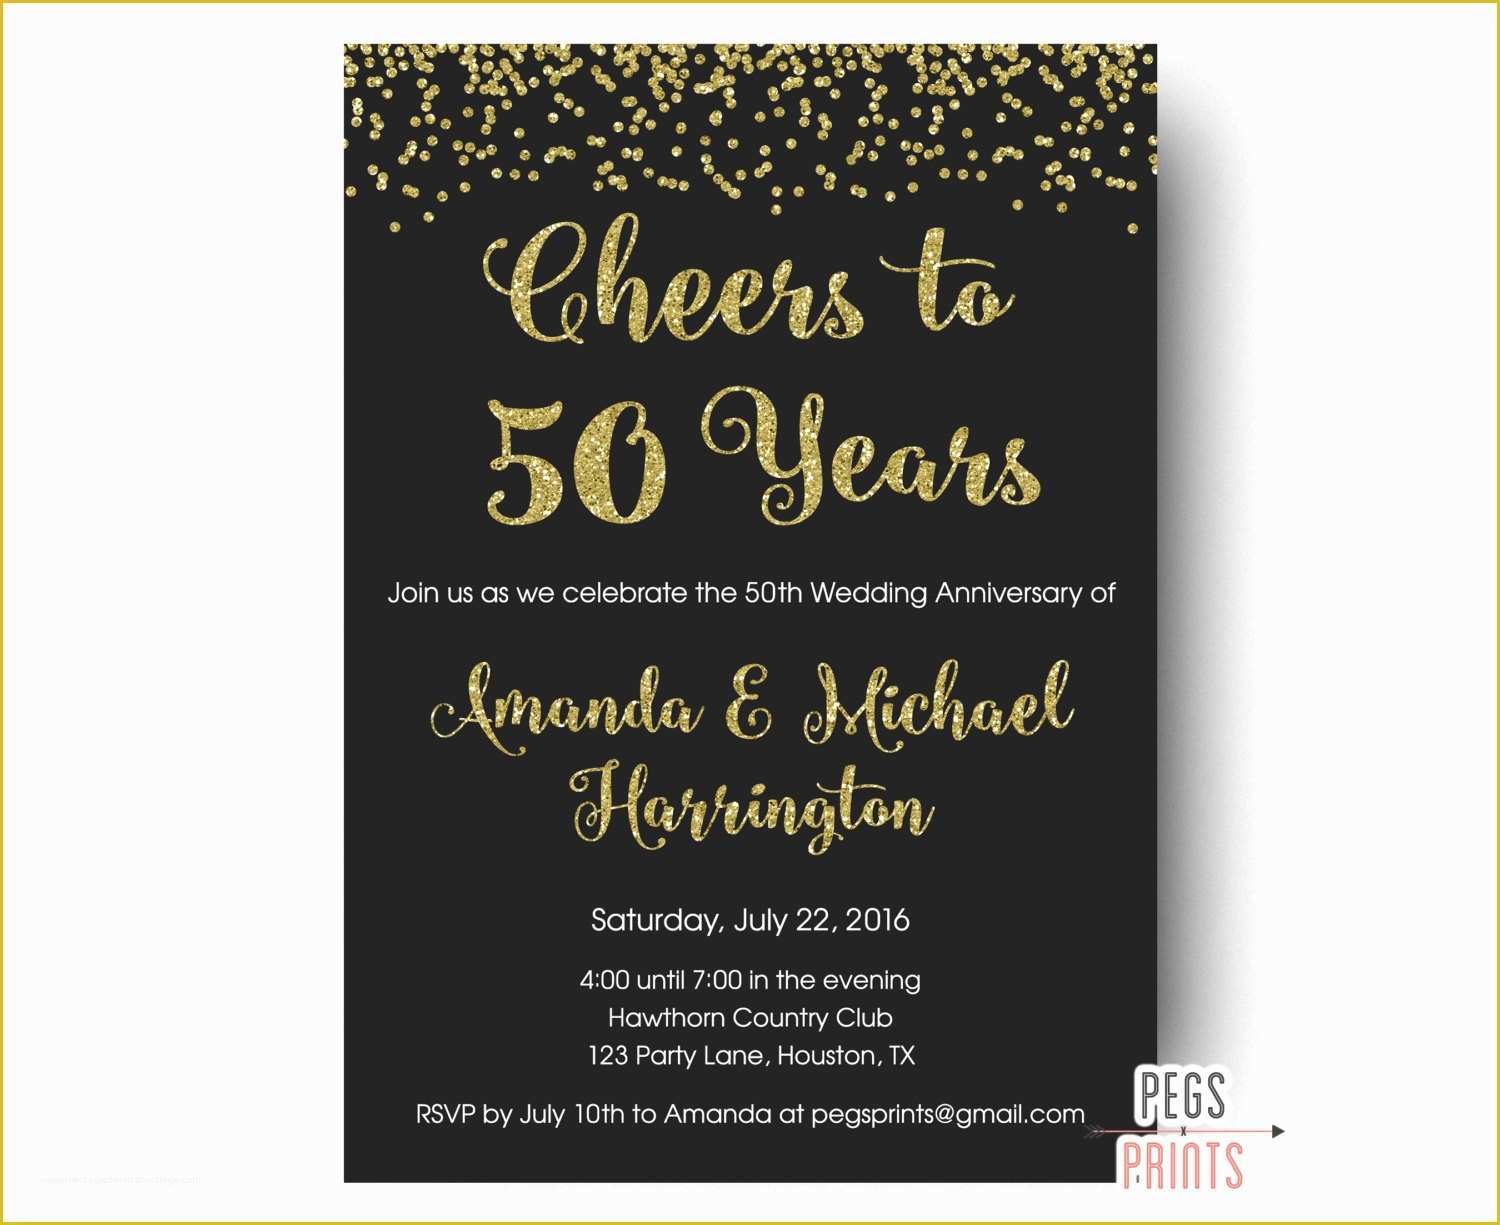 50th Wedding Anniversary Invitations Templates Free Download Of Cheers to 50 Years Invitation 50th Anniversary Invitation